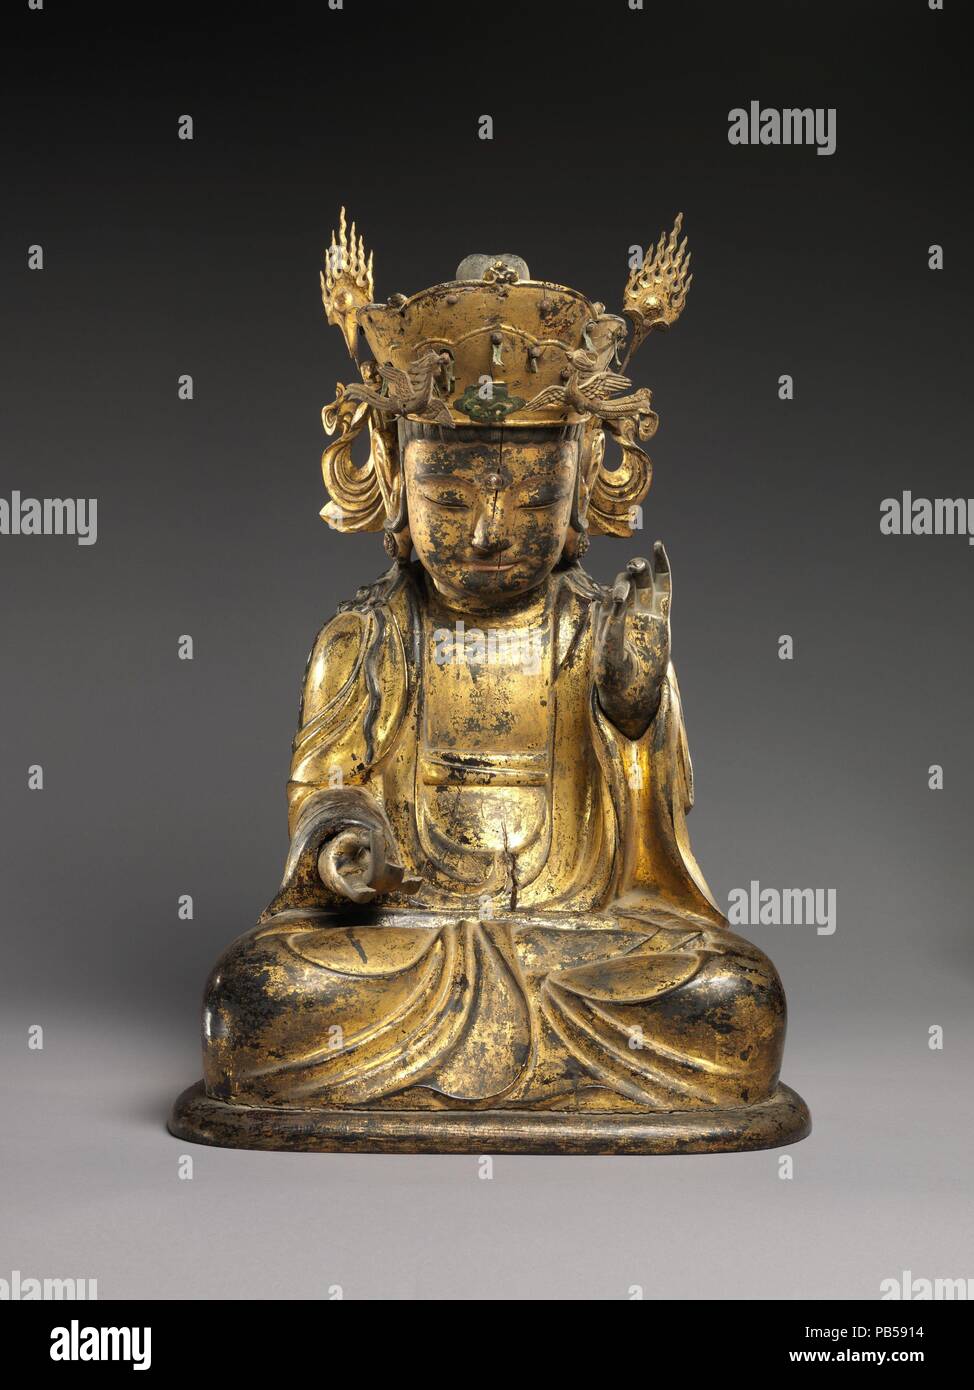 Seated bodhisattva (left attendant of a triad). Culture: Korea. Dimensions: H. 20 1/4 In. (51.4 cm); W. 14 1/4 in. (51.4 cm); D. 12 3/4 in. (36.2 cm)  H. to flame elements: 21 1/2 in. (54.6 cm). Date: ca. mid- 17th century.  This elegant figure represents a bodhisattva--a compassionate, enlightened being who has chosen to remain on earth to help mortals attain enlightenment. This statue was originally one of two attendant bodhisattvas that flanked a Shakyamuni or Amitabha Buddha. The tall, ornate crown, oblong face, and drapery with cascading folds indicate that the statue was likely produced  Stock Photo